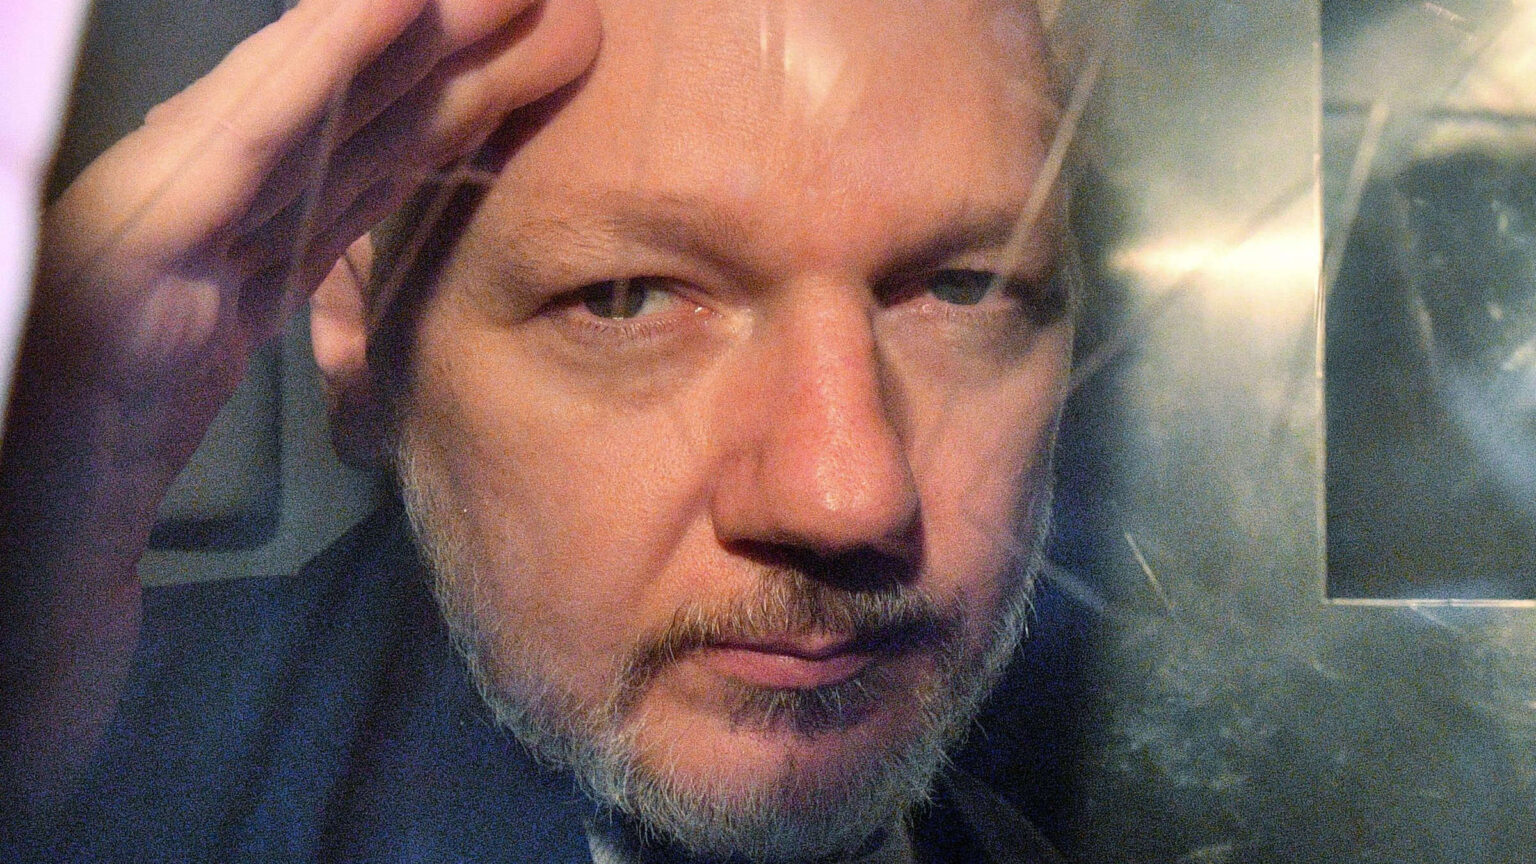 The U.S. wants WikiLeaks founder Julian Assange to be extradited, but AMLO is stepping in to save his skin. Here's why Assange was offered asylum.